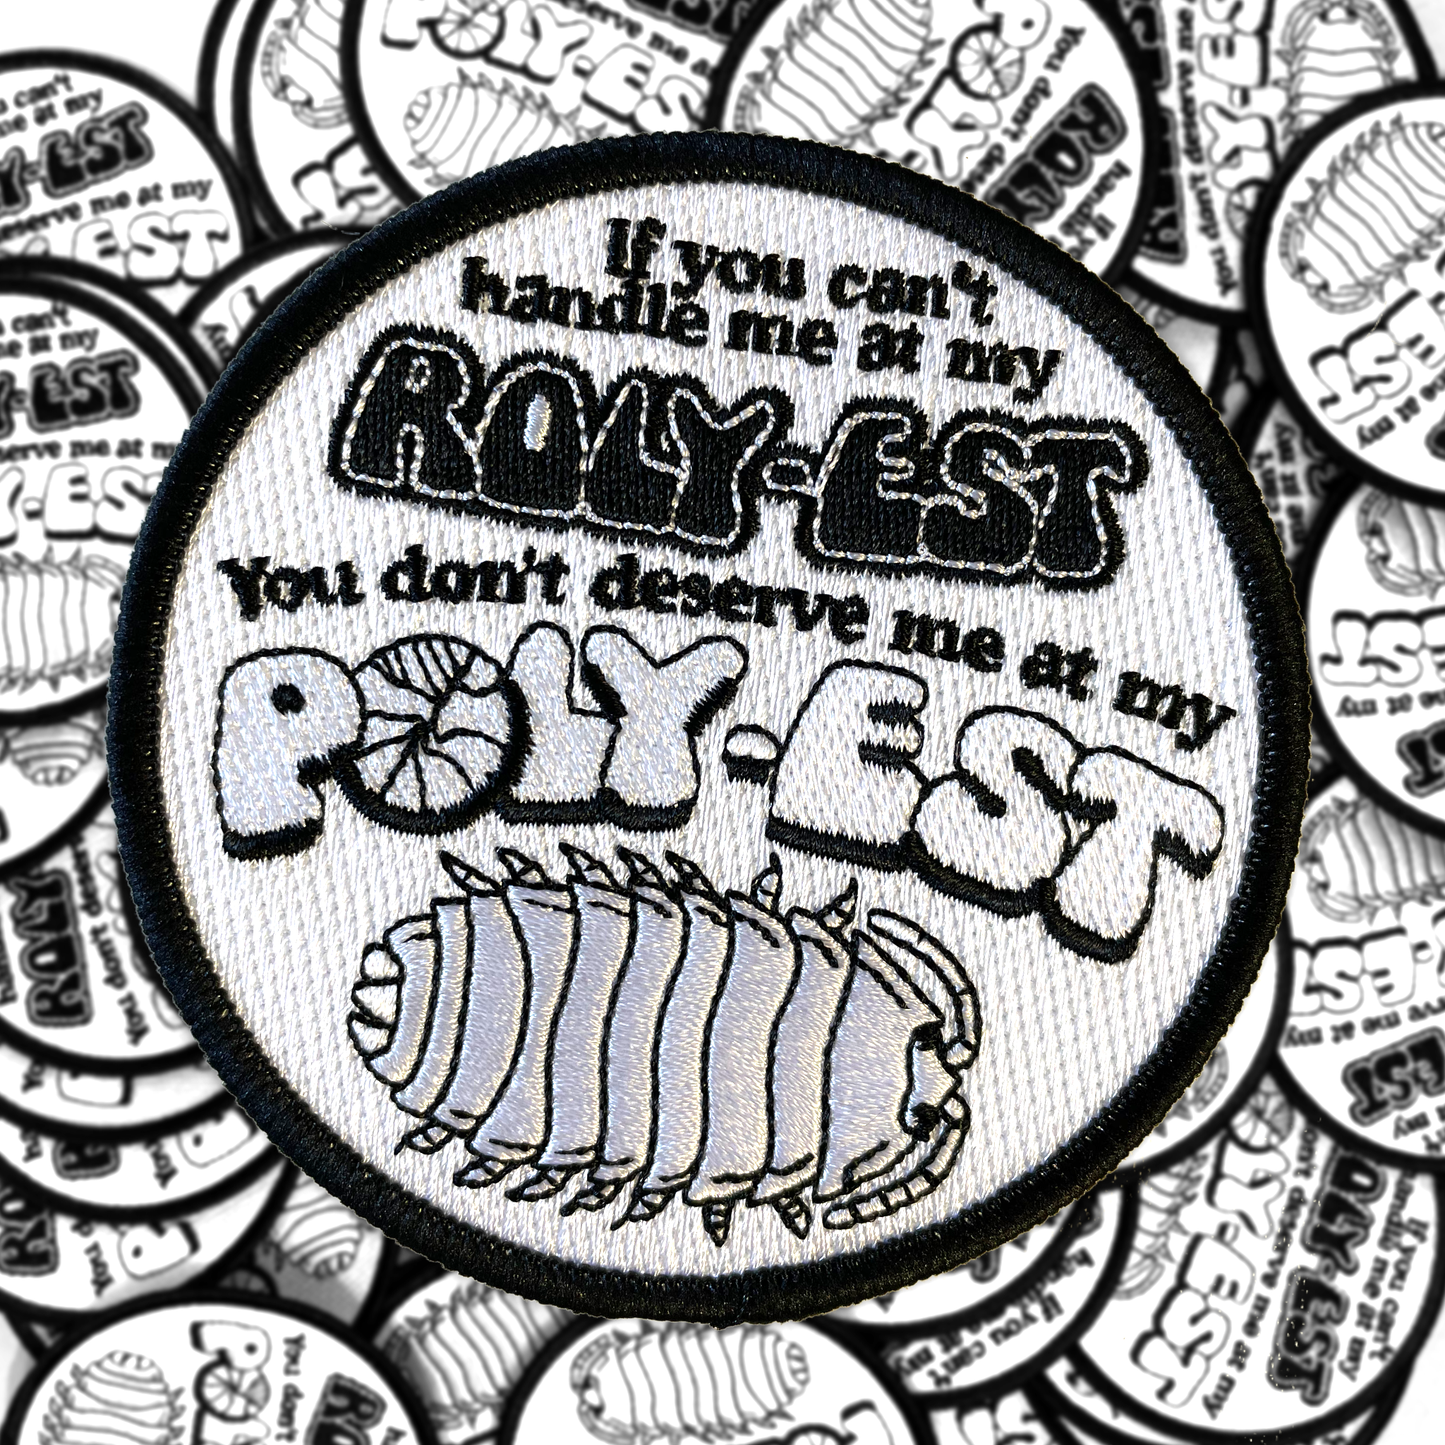 Patch "Rolypoly"